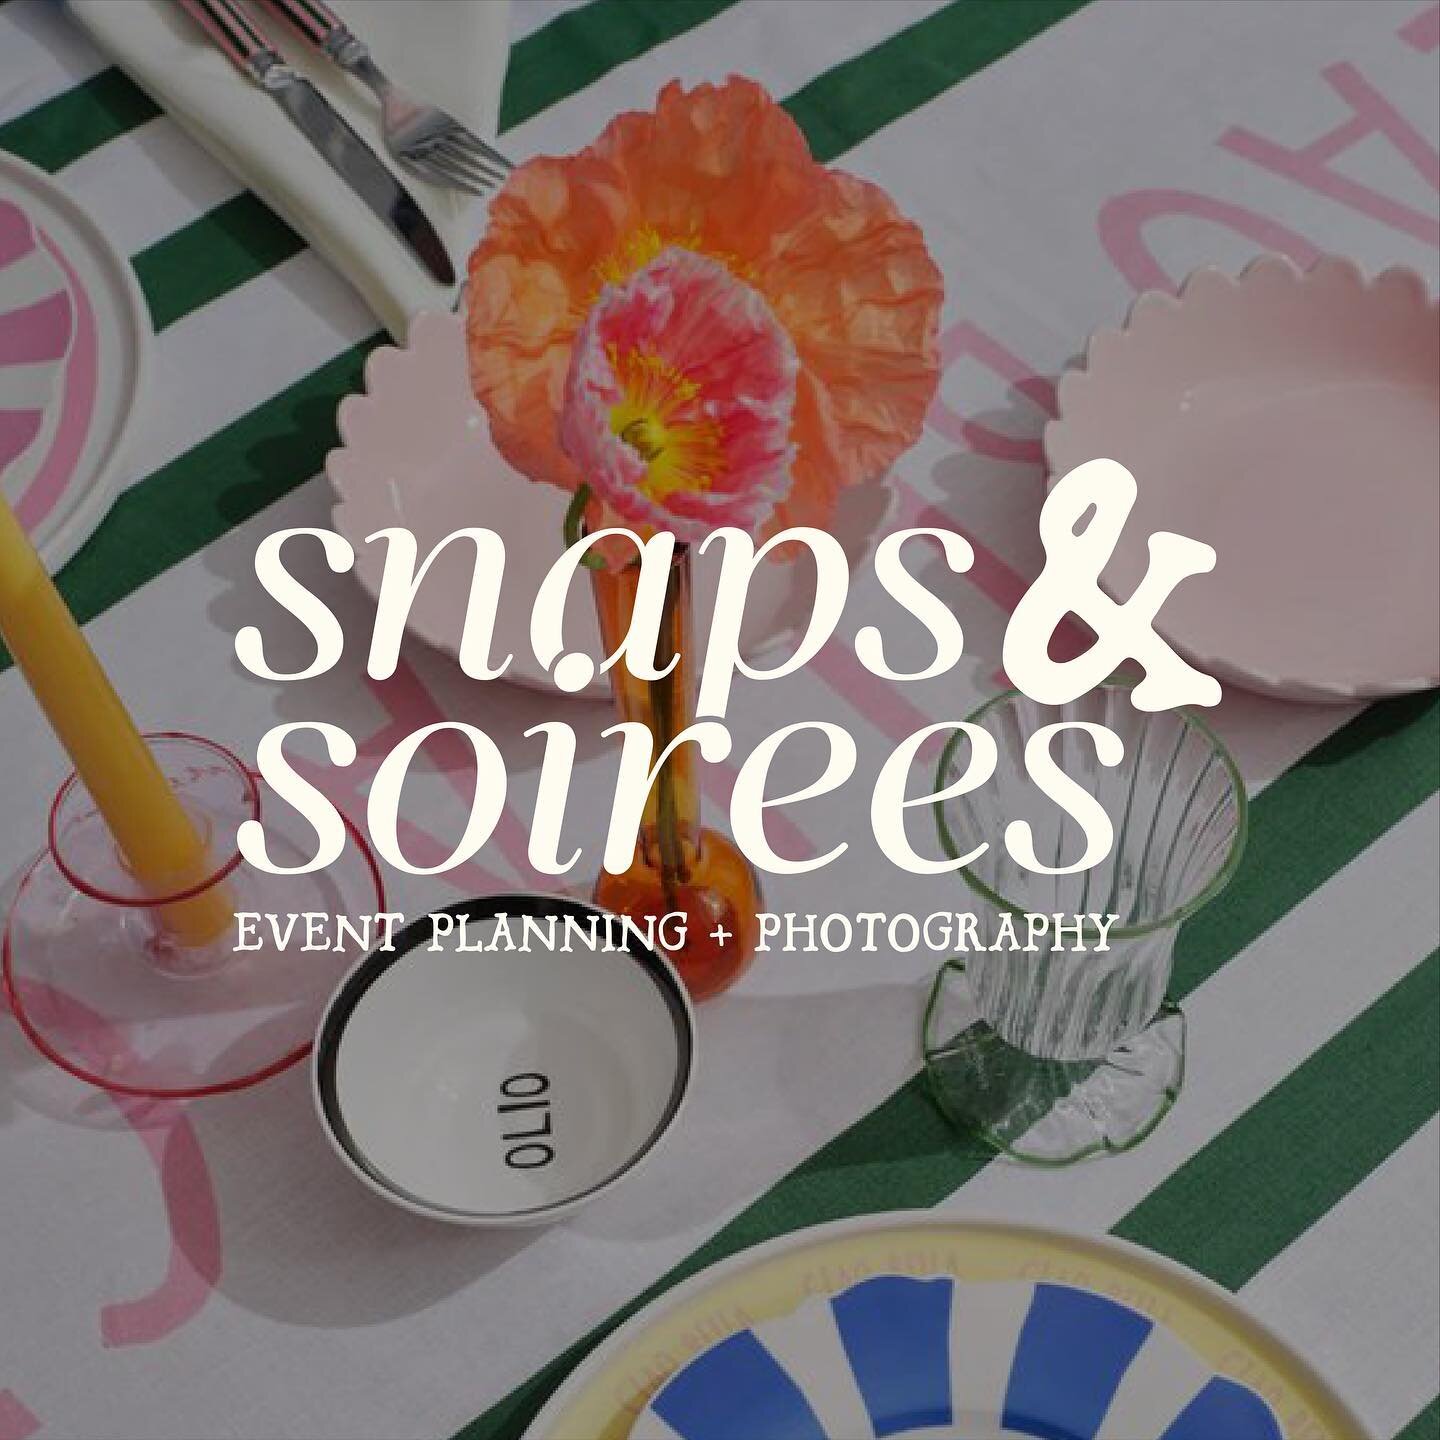 Introducing Snaps &amp; Soir&eacute;es🌴🥂 - A photography and event company located in Florida. Need to plan a party, event or a family get together? Snaps &amp; Soirees will take care of the whole shebang. Their mission is to sprinkle a bit of magi